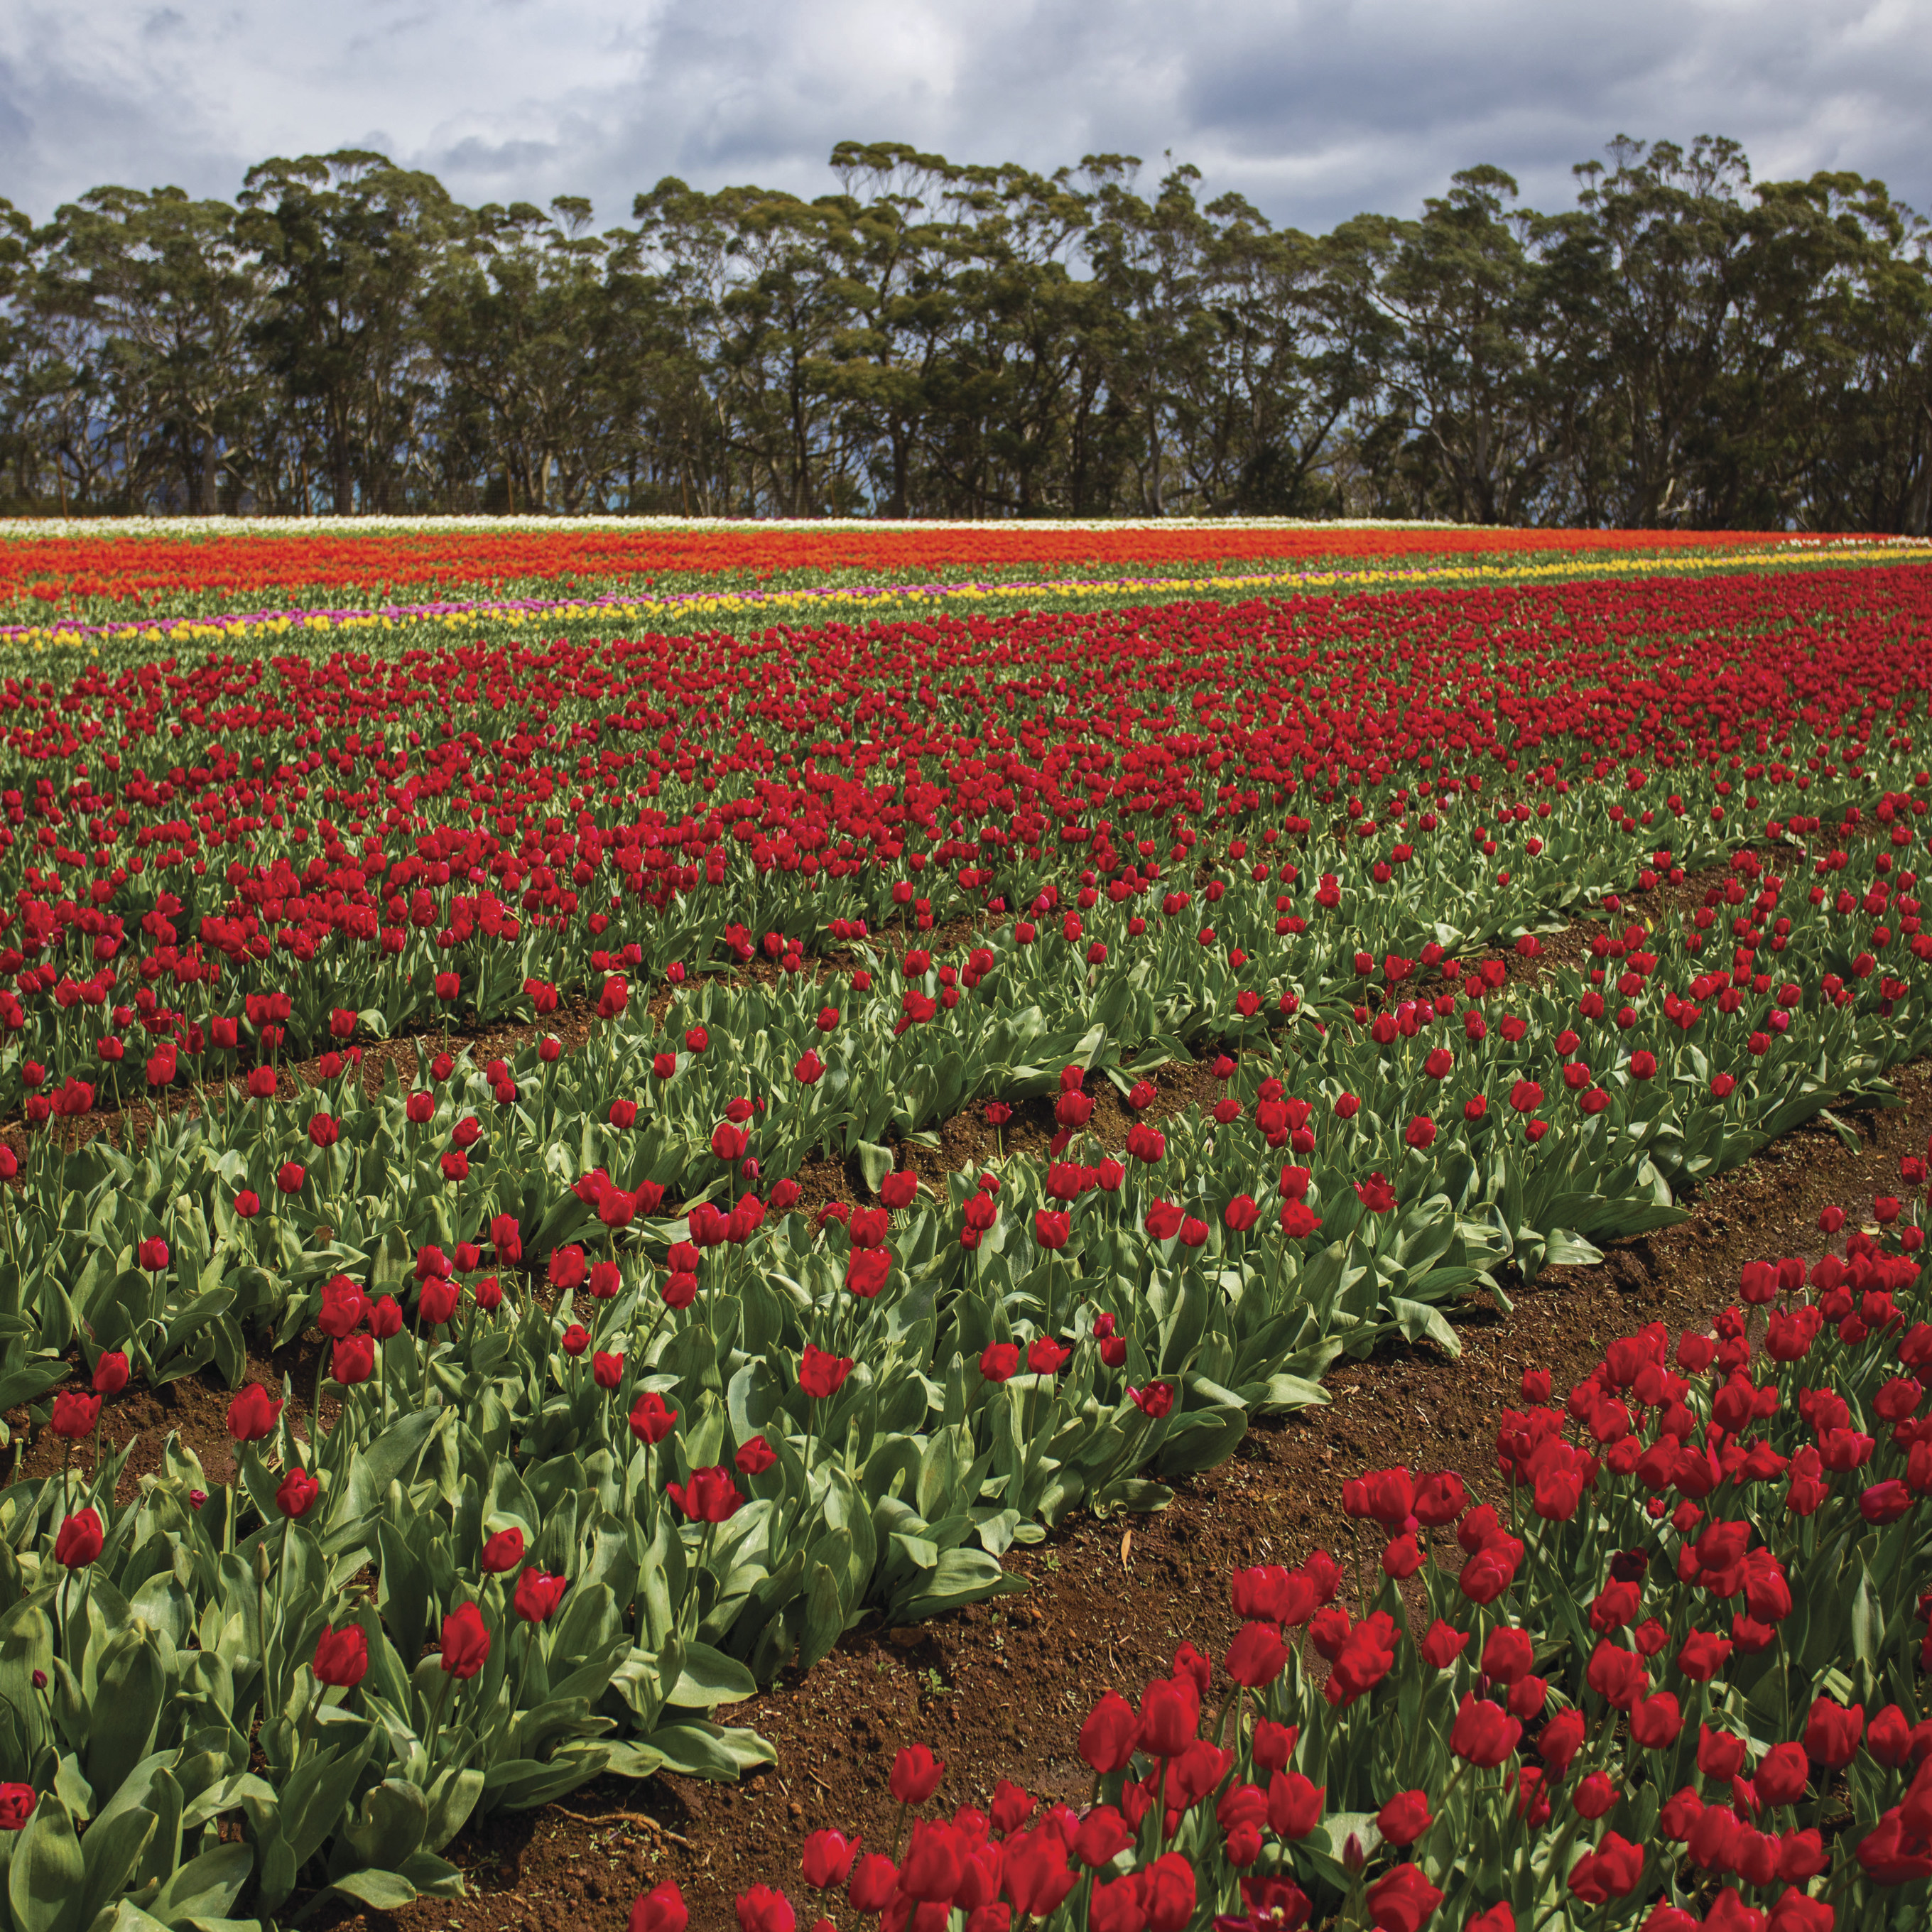 Rows full of vibrant red tulips fill the farm located in the Table Cape.